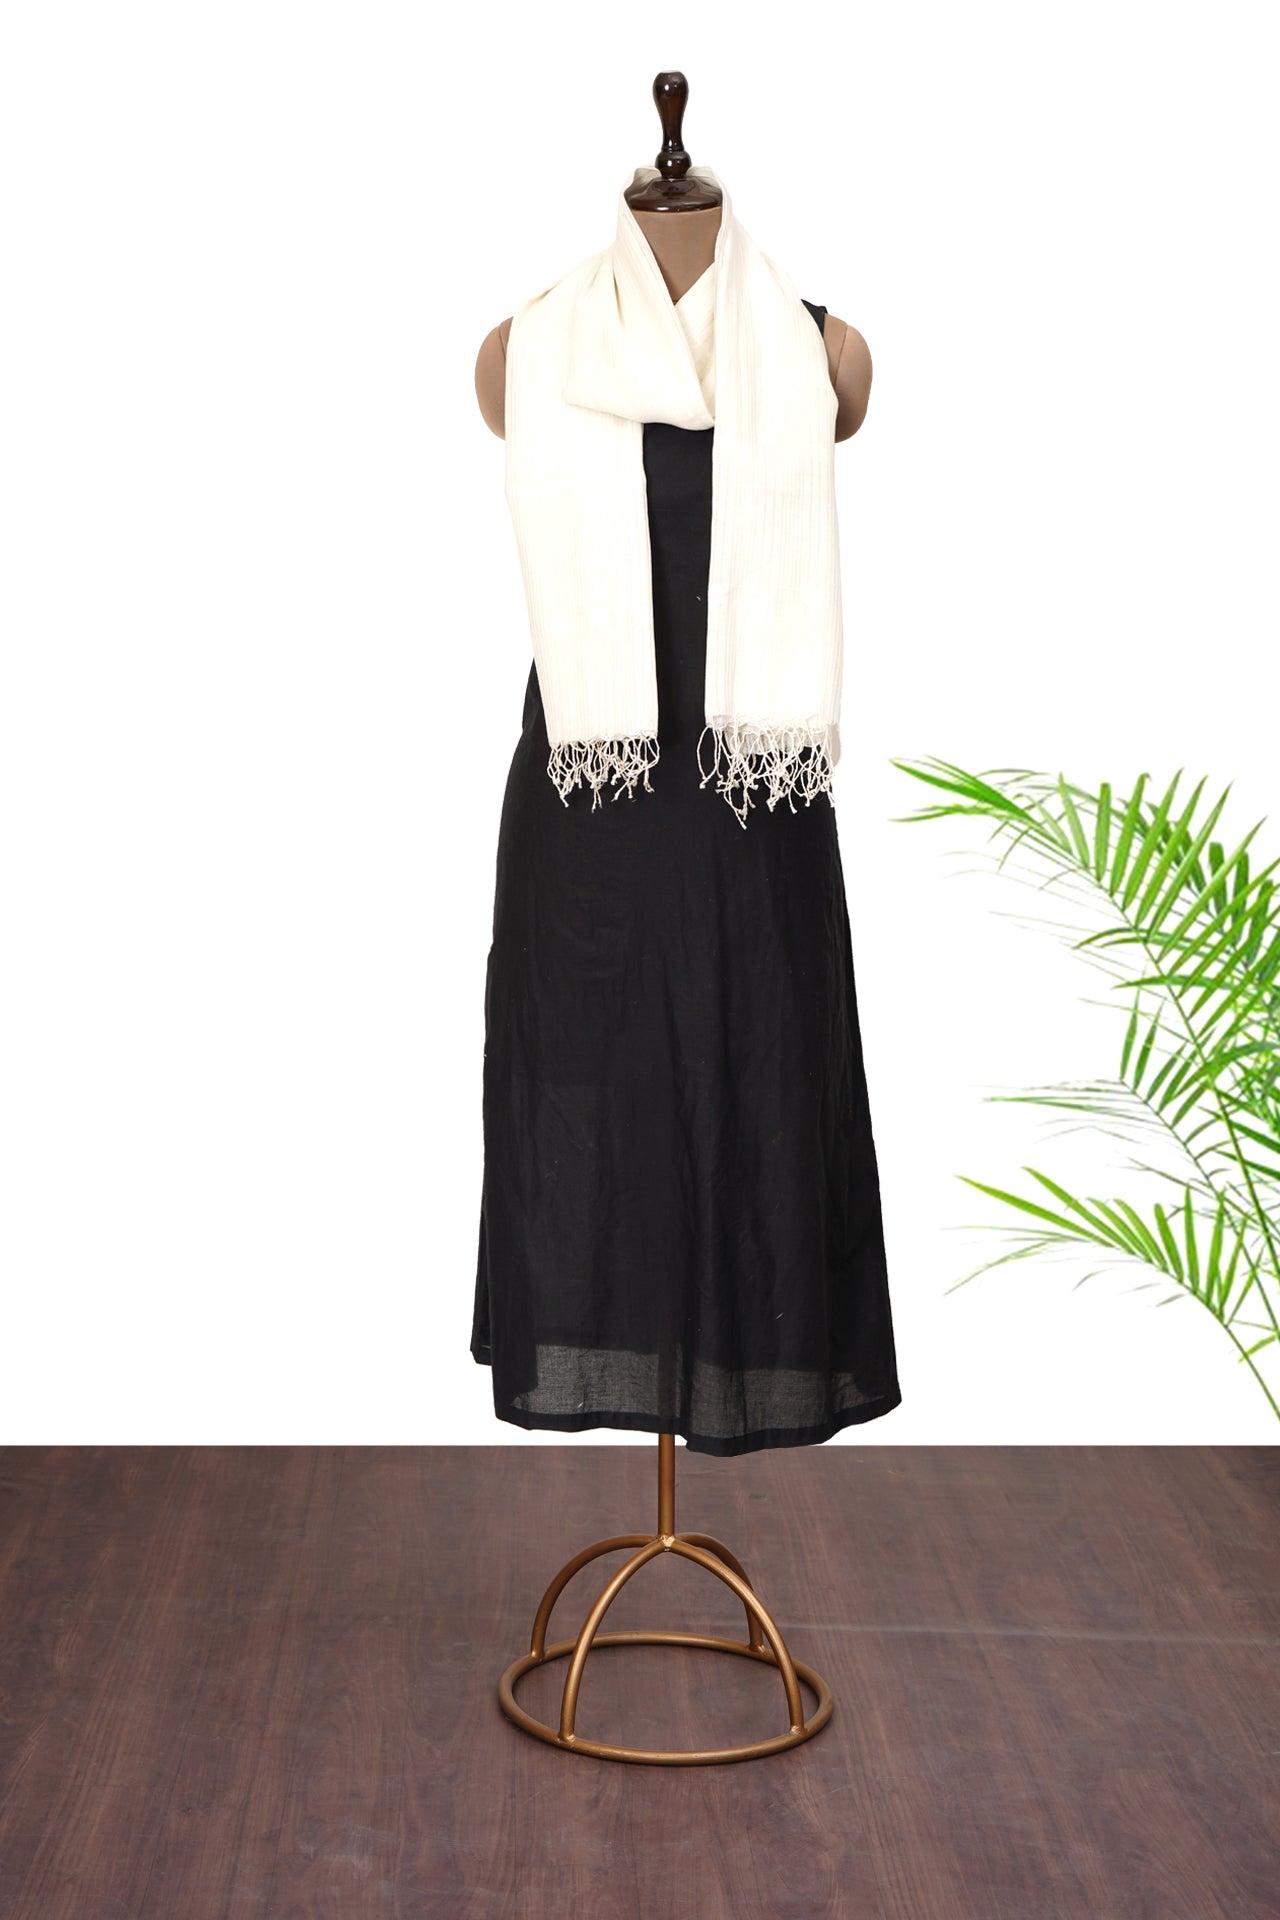 Off White Color Handwoven Jamdani Cotton Stole With Tassels